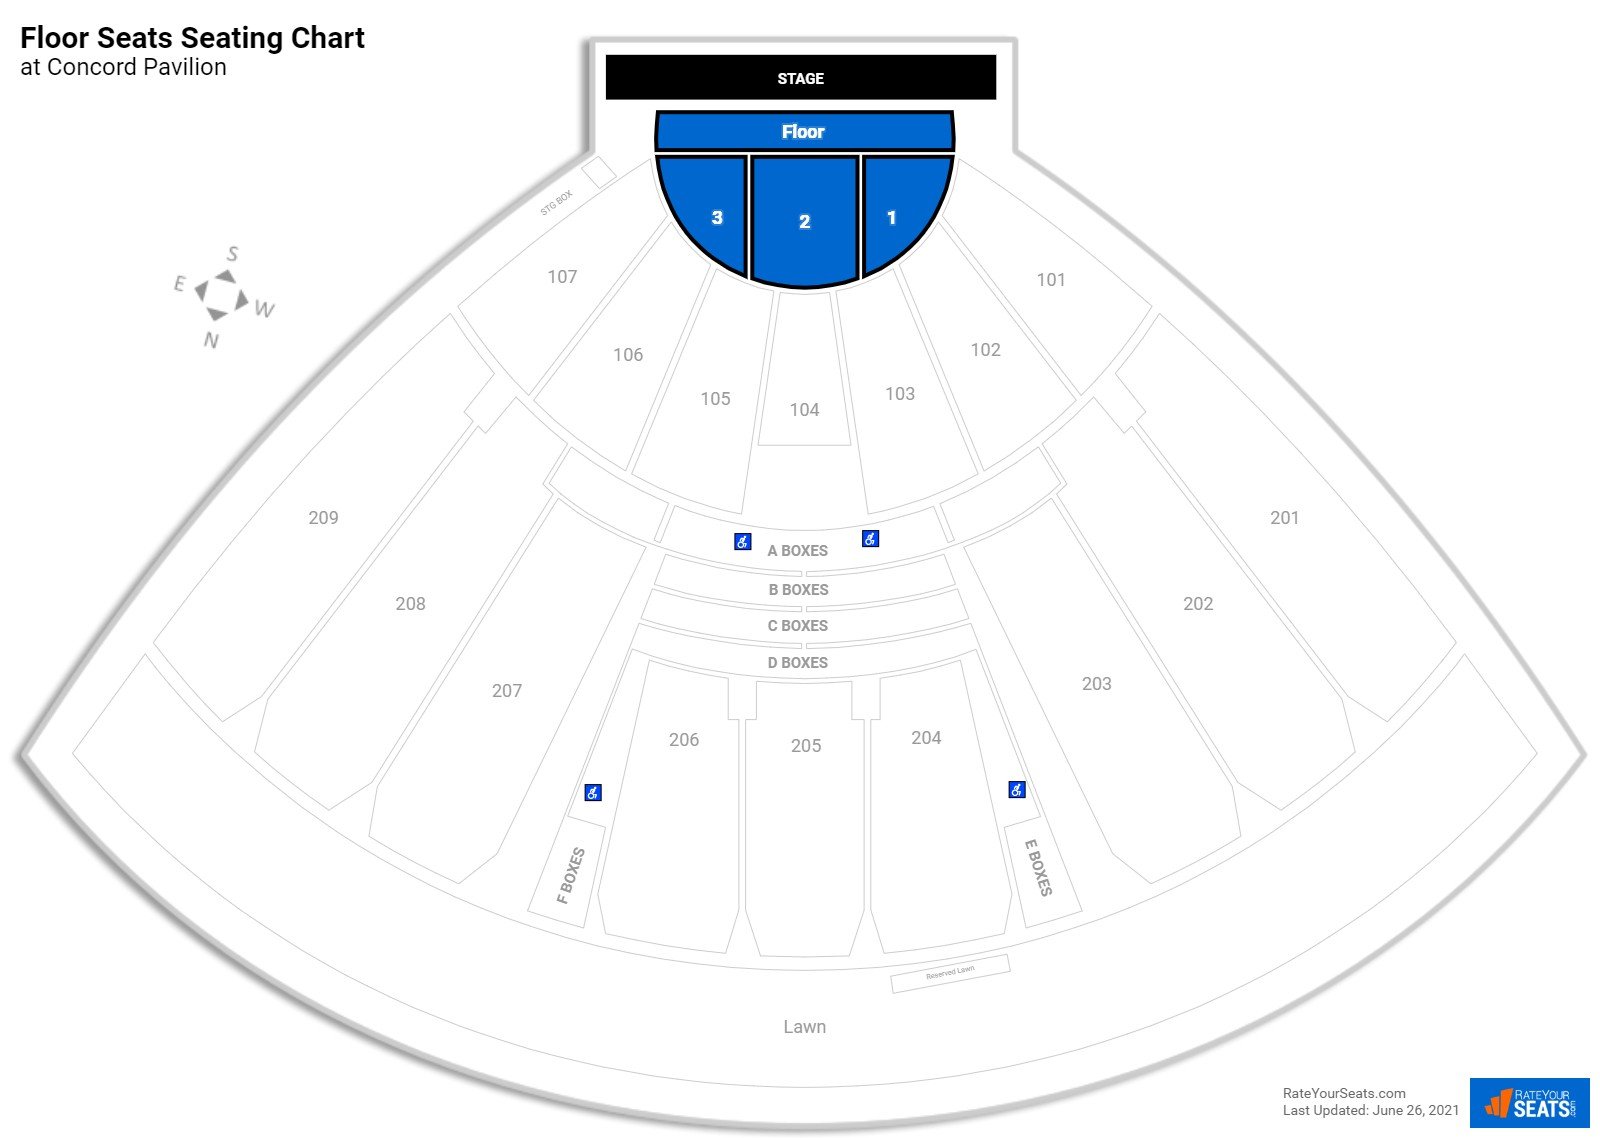 Concert Floor Seats Seating Chart at Concord Pavilion